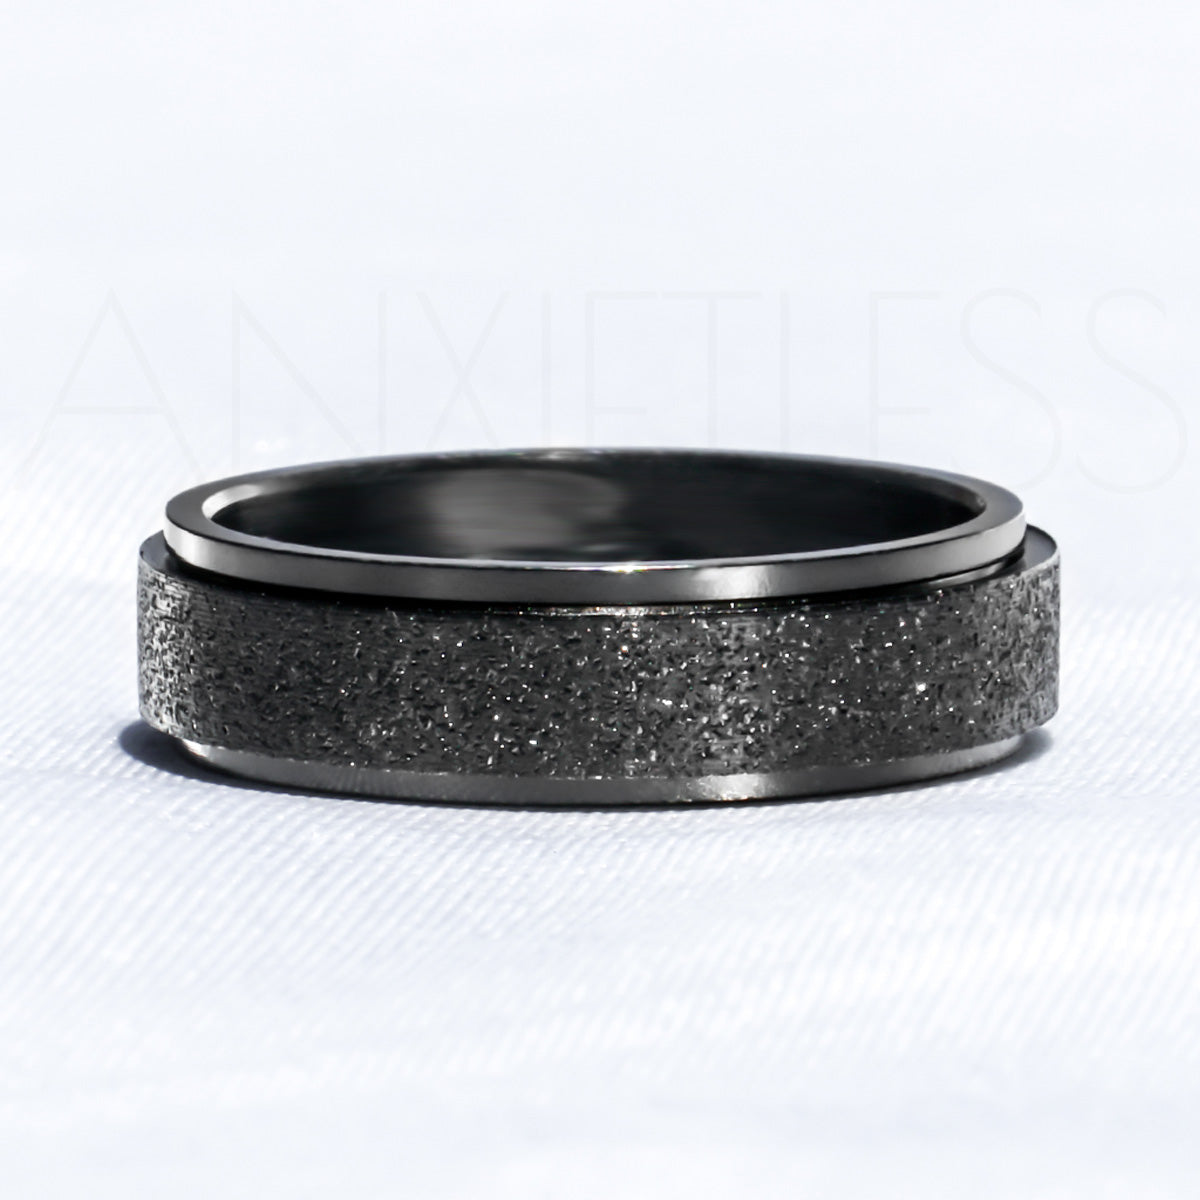 Sparkly Black Anxiety Ring Laid Flat on White Background